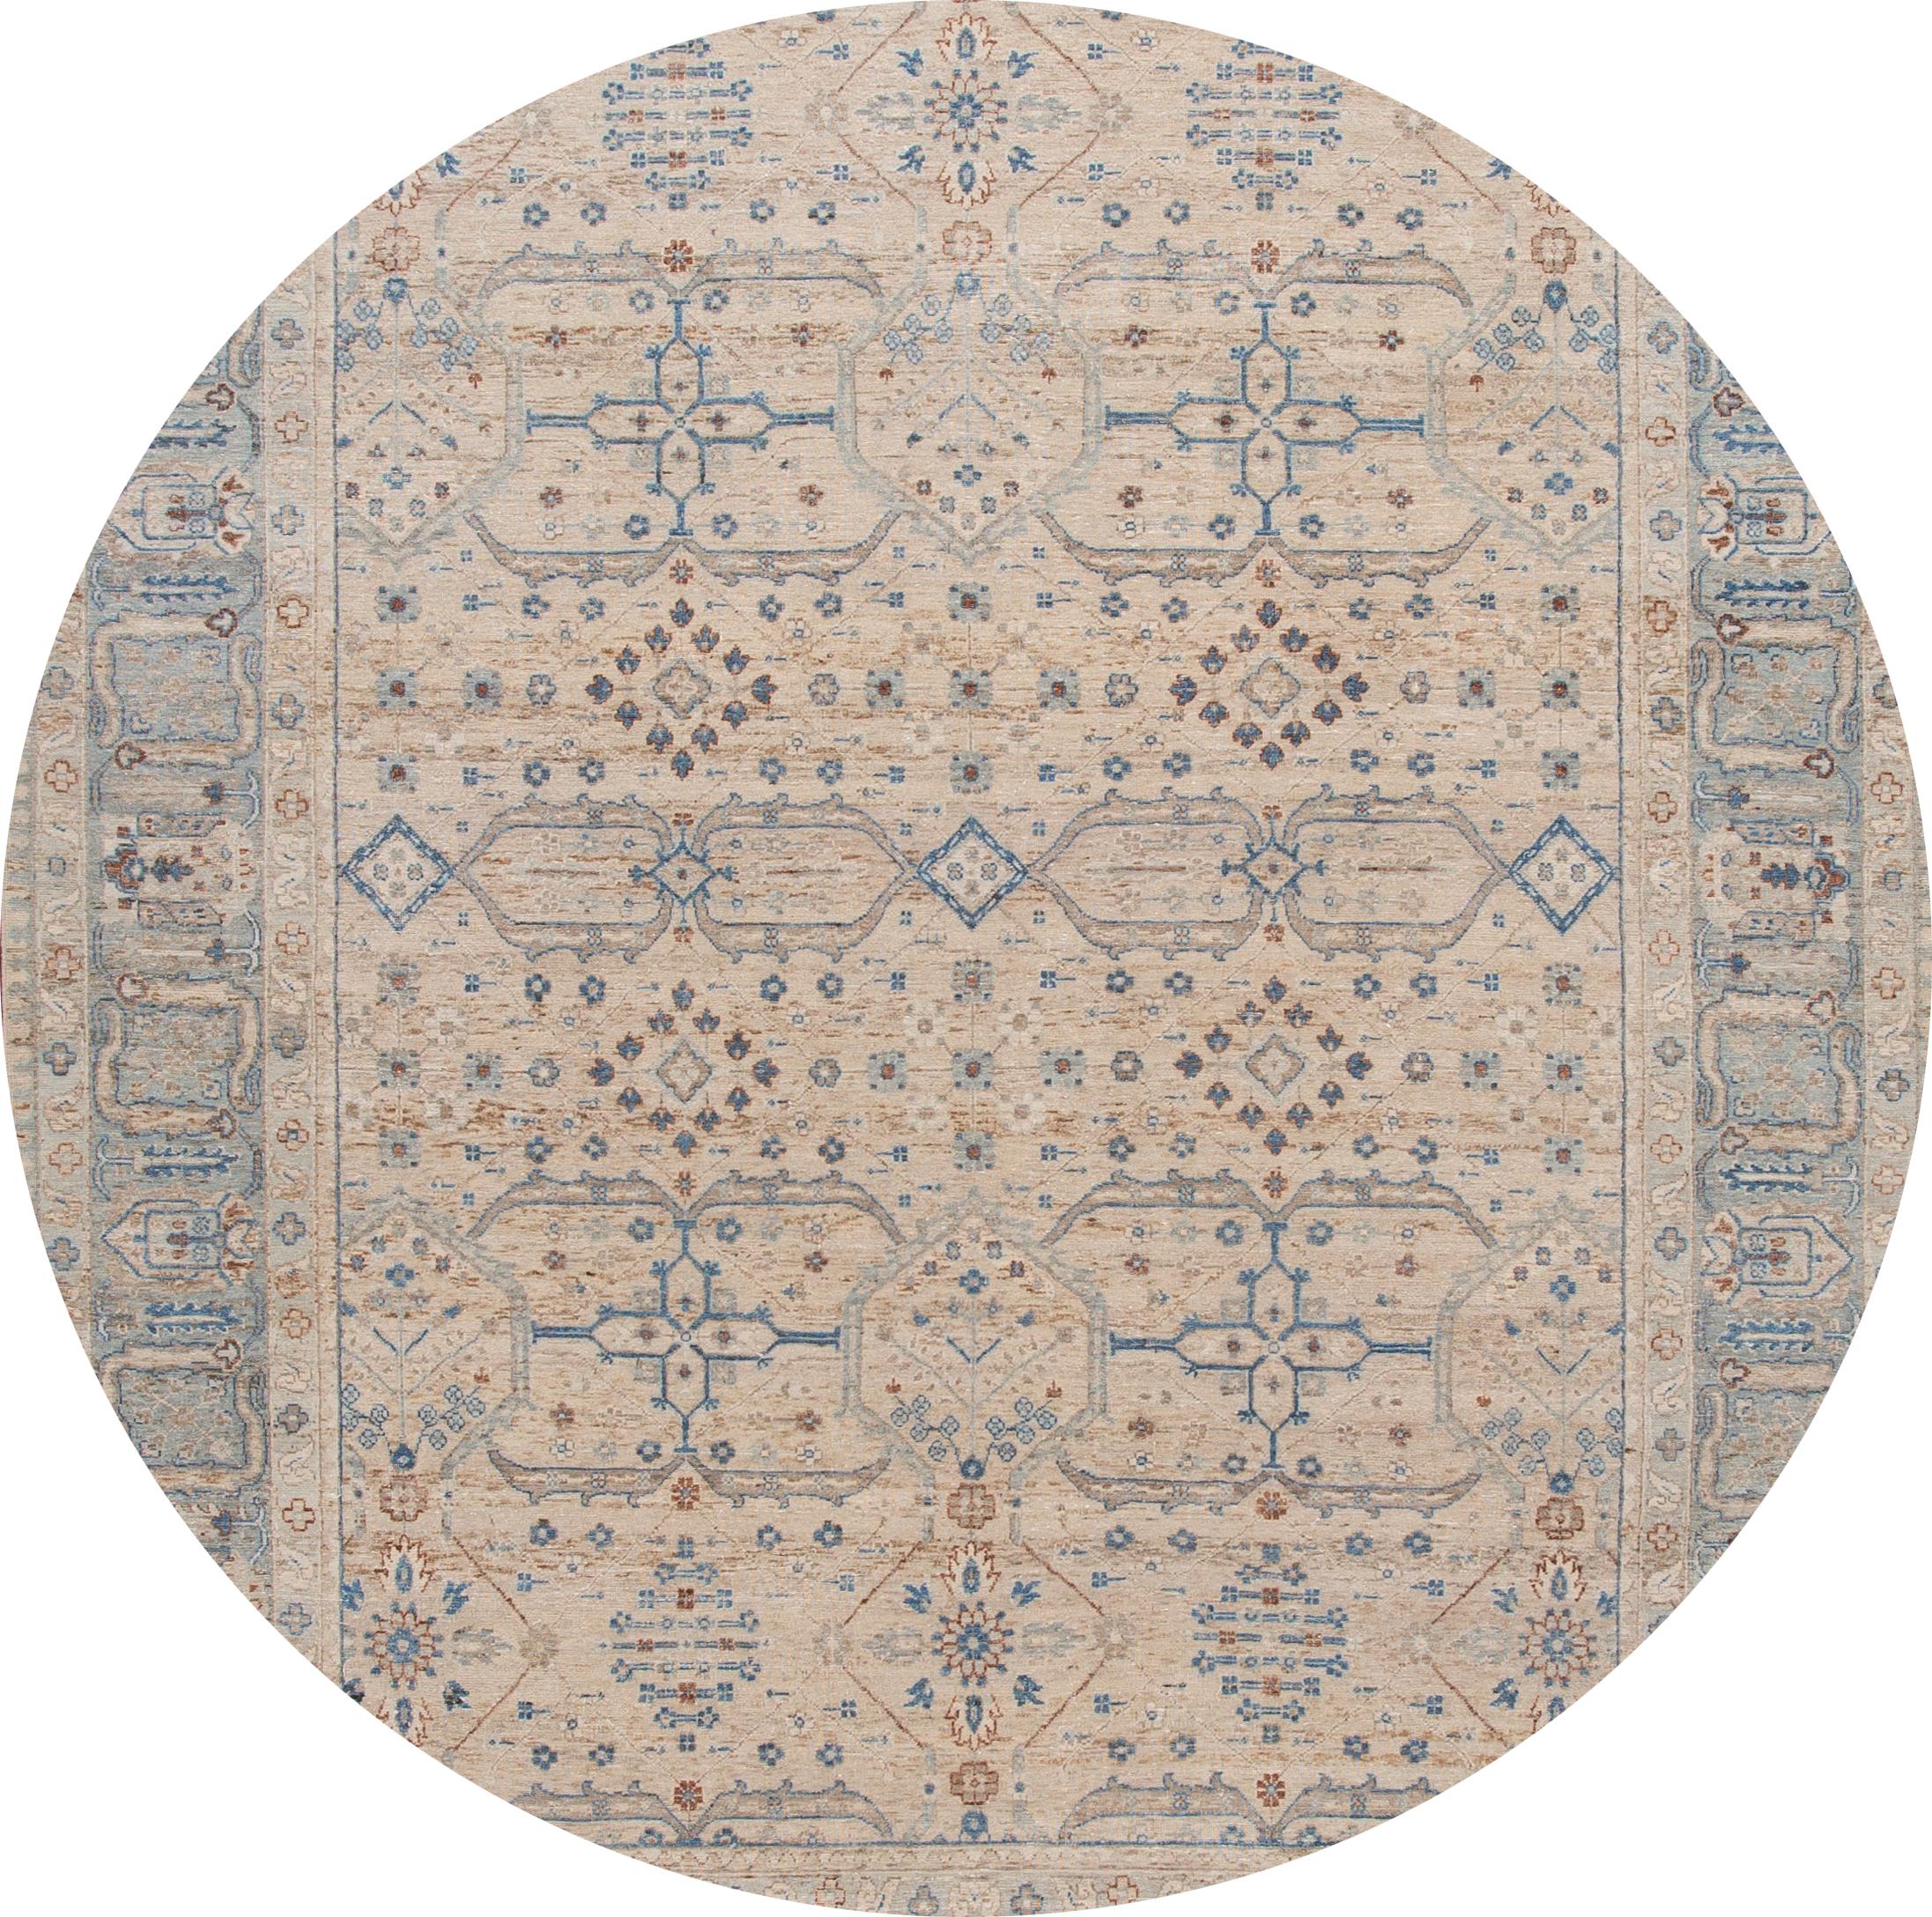 Beautiful modern hand knotted Indian wool rug with a beige field, blue, brown, and ivory accents with an all-over geometric design.

This rug measures: 9' x 12' 1